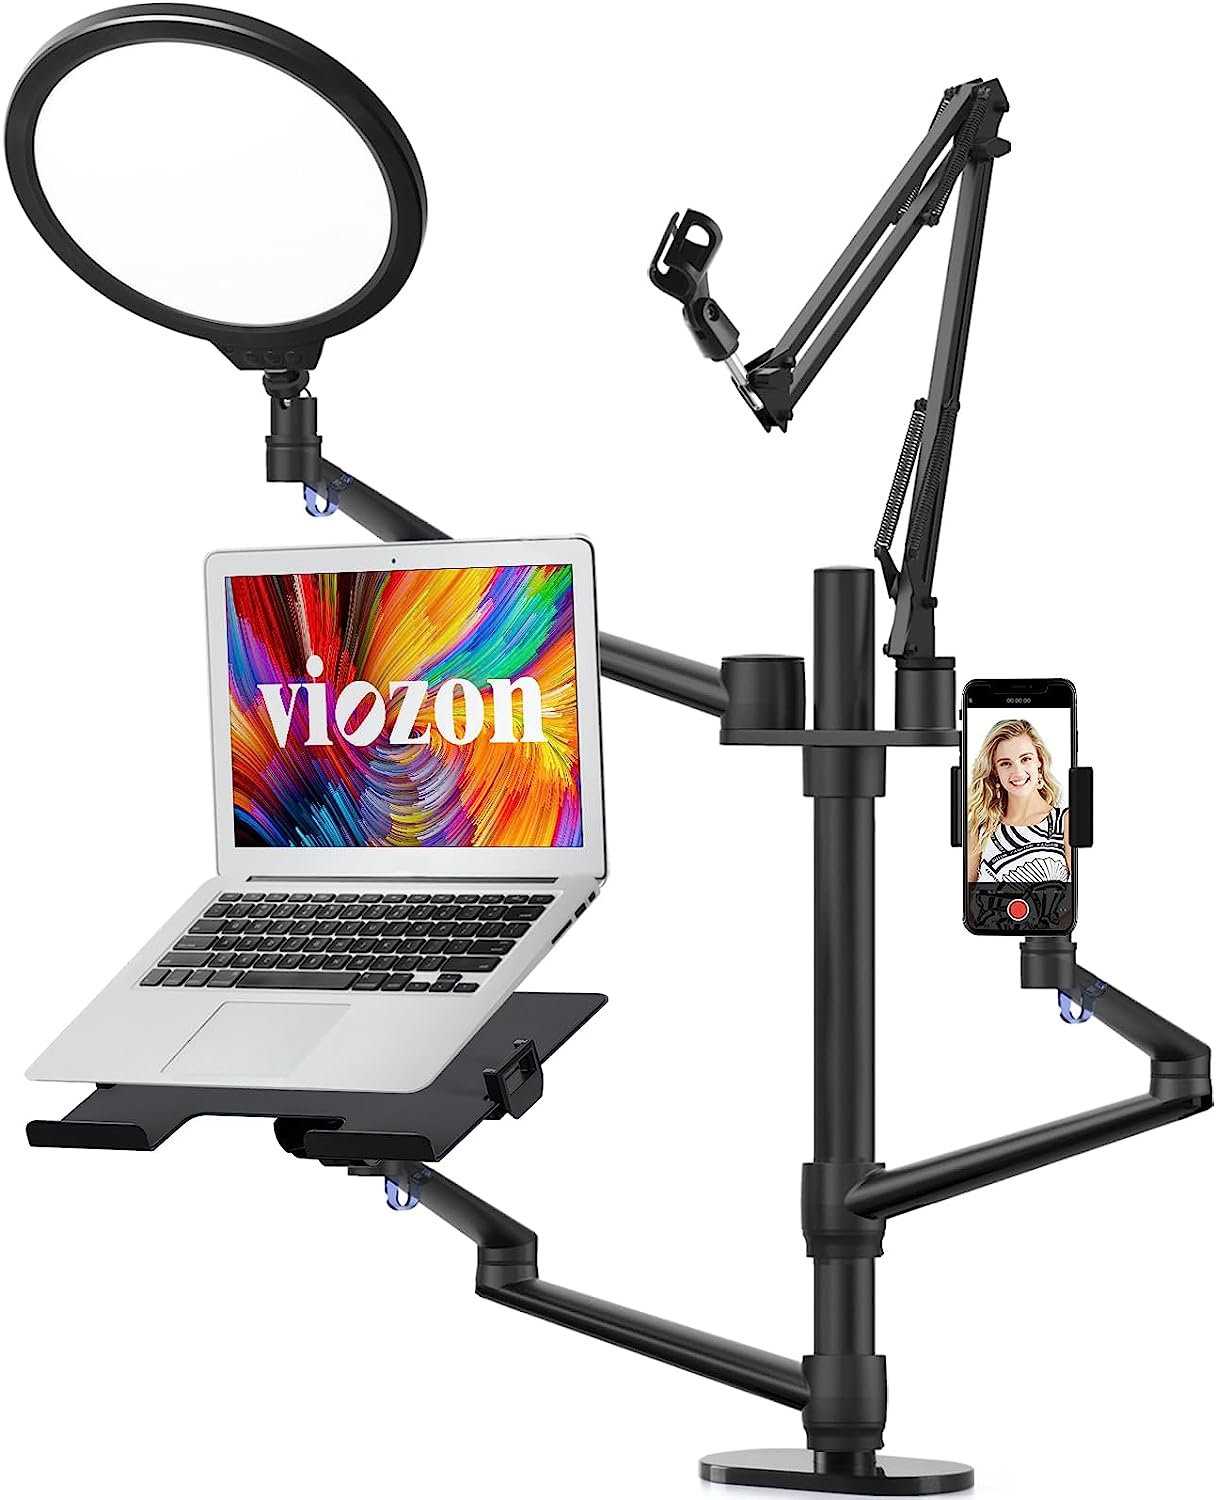 Product photo of "Viozon Selfie Desktop Live Stand Set", emphasizing the gangly arms that hold a laptop, a ring light, a mobile phone, and a microphone holder